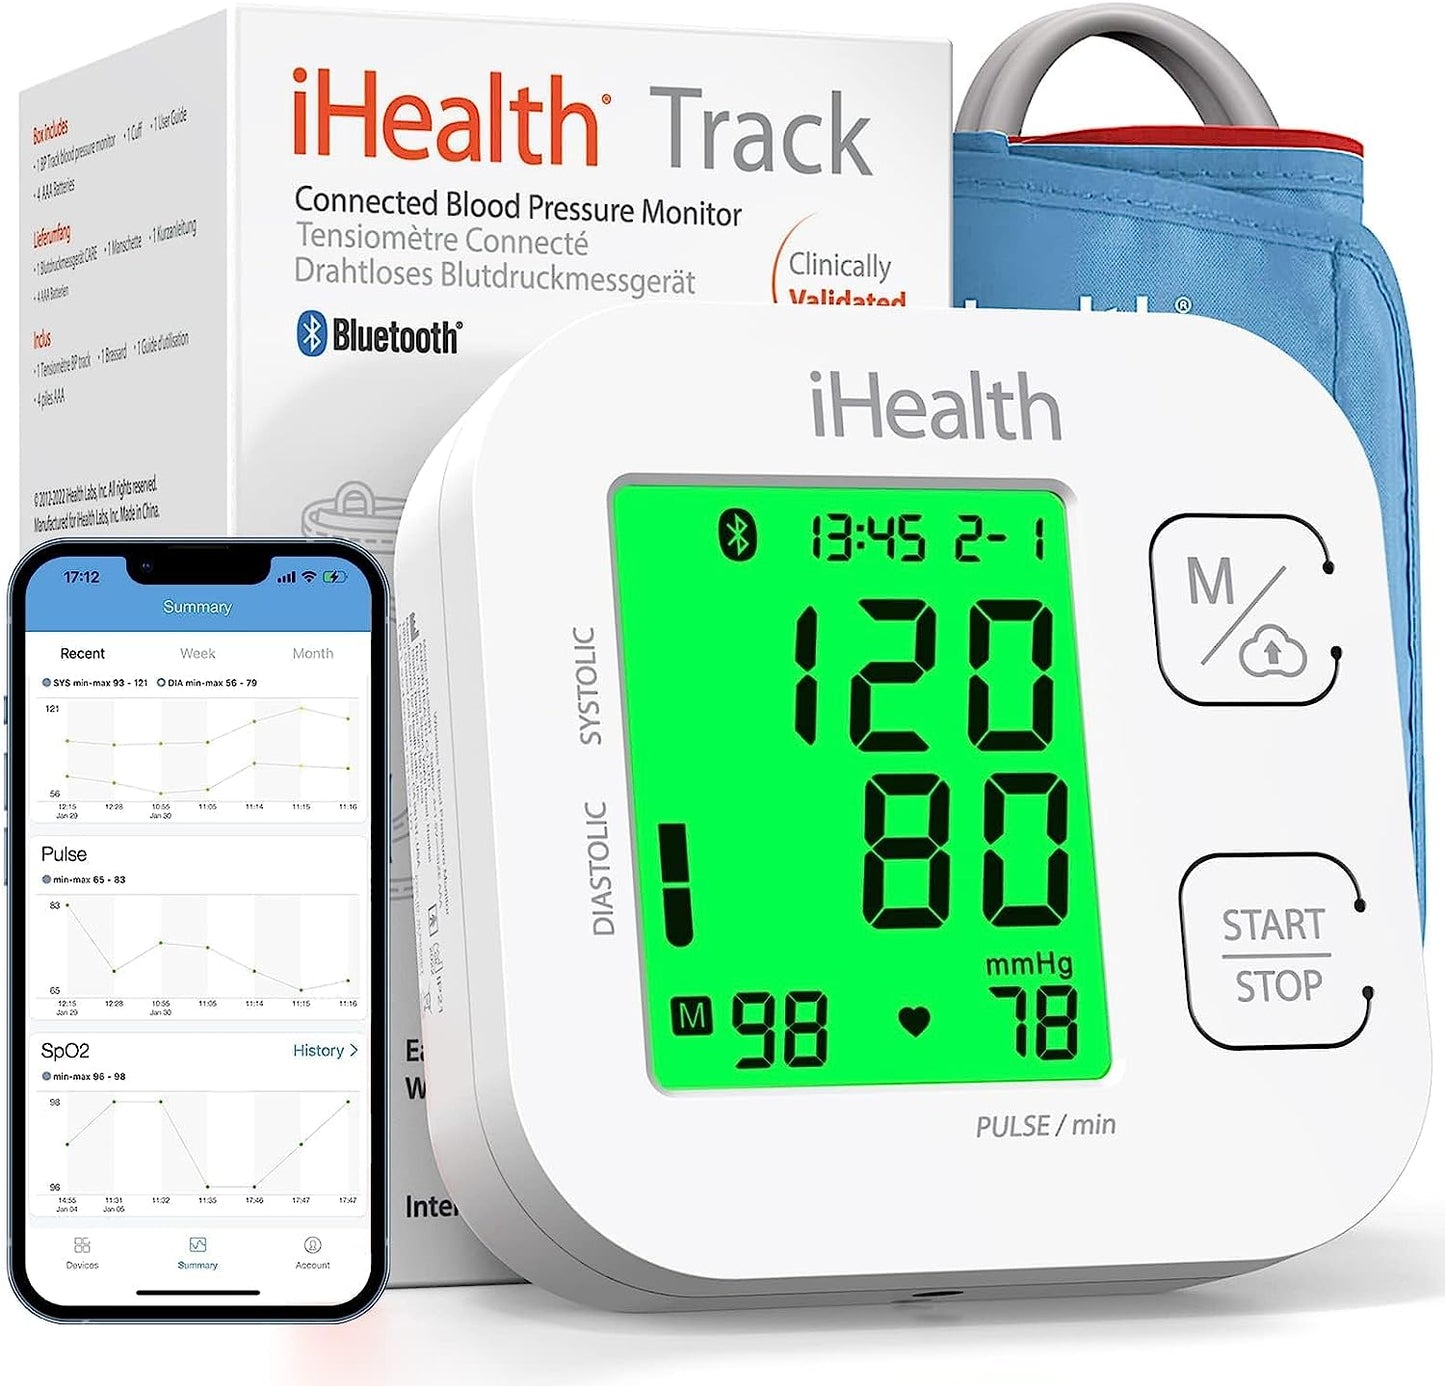 Track Smart Upper Arm Blood Pressure Monitor with Wide Range Cuff That Fits Standard to Large Adult Arms, Bluetooth Compatible for Ios & Android Devices